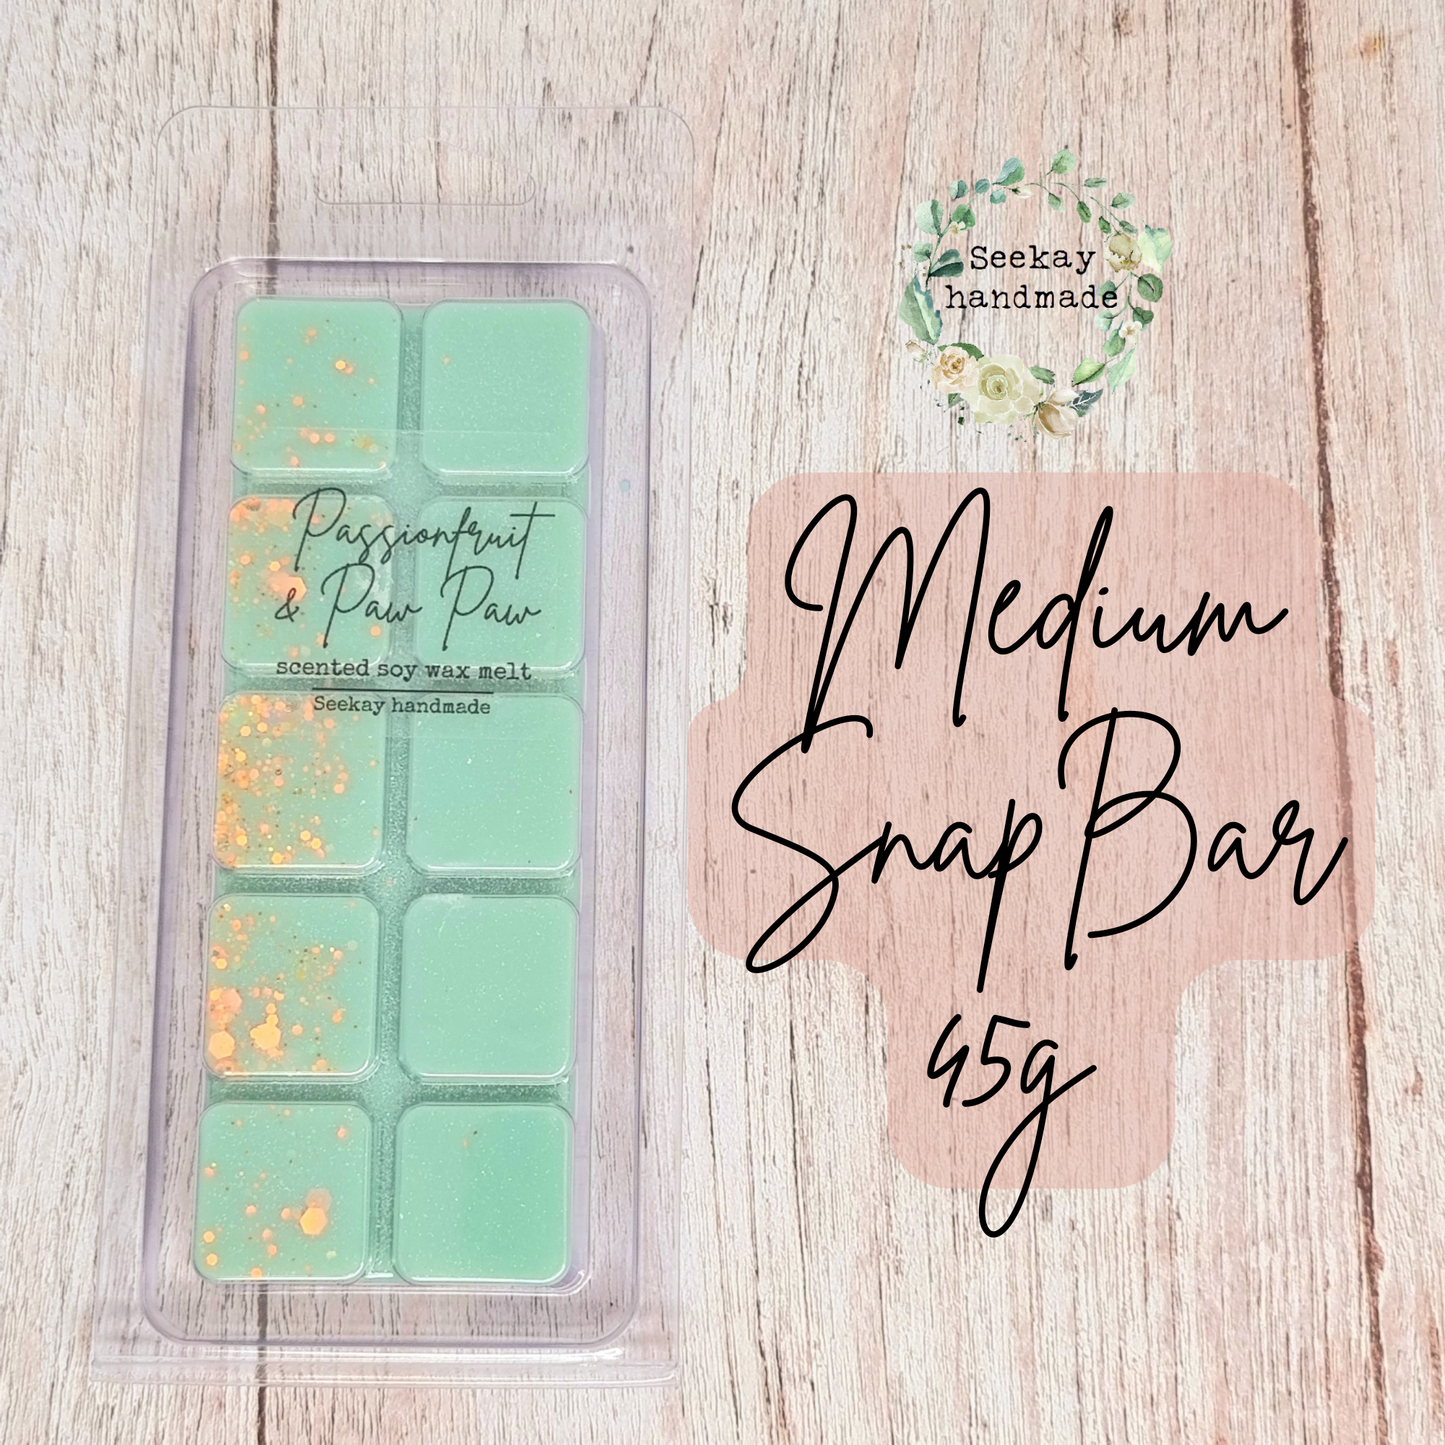 Passionfruit & Paw Paw scented soy wax melt